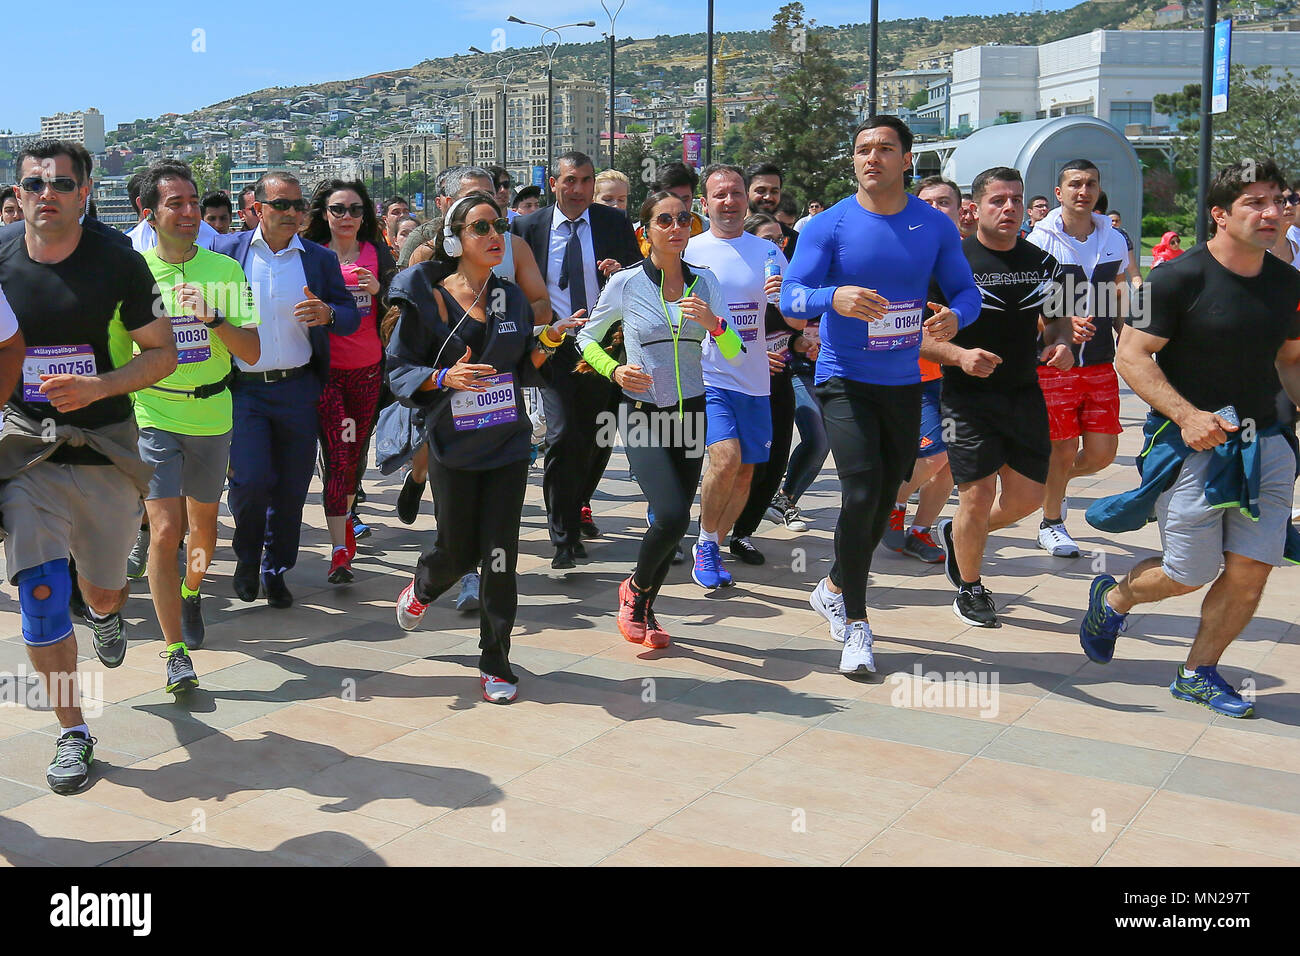 Azerbaijan. 13th May, 2018. Leyla Aliyeva is the first daughter of the President of Azerbaijan during the marathon runners in Baku. May 13, 2018. The semi-marathon was cover a distance of 21 kilometers, starting at the national Flag Square and finishing at Baku Olympic Stadium. This year's semi-marathon was open to anyone above the age of 16 upon prior registration, and the event got nearly 18,000 registered participants. Credit: Aziz Karimov/Pacific Press/Alamy Live News Stock Photo